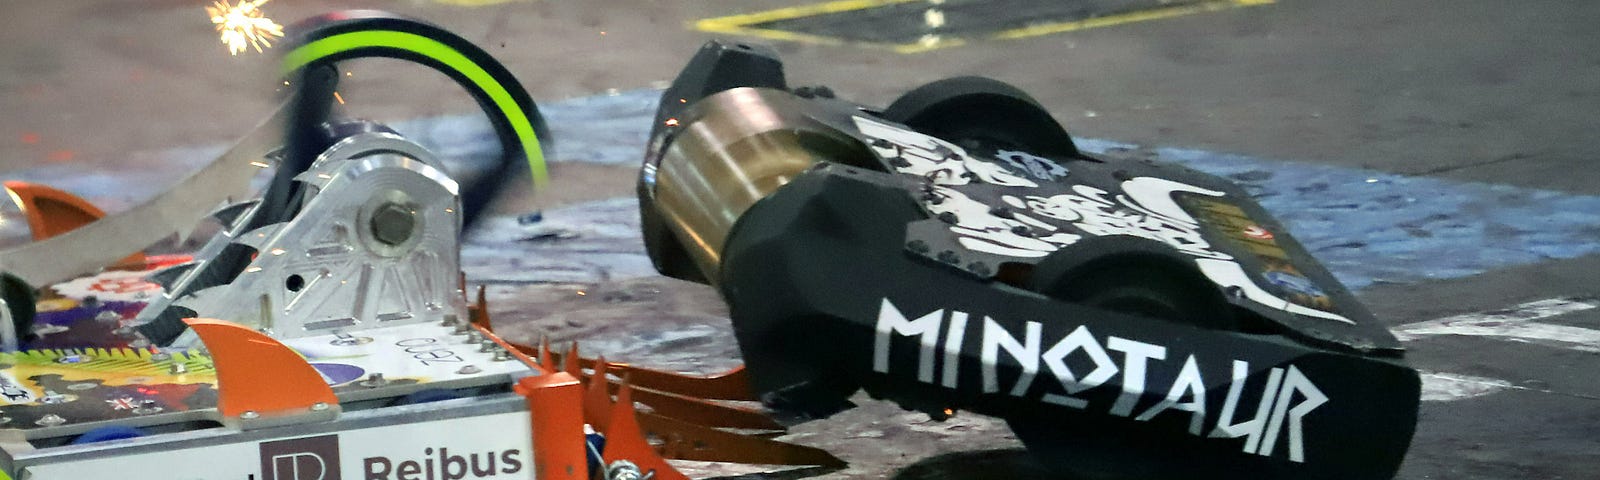 A weapon-on-weapon hit between End Game and Minotaur. End Game is a white and orange box-bot with a vertical spinner. Orange forks jut fro the front. Minotaur is a black box with white lettering and a while minotaur painted on the top. A wide vertical drum spinner sits at the front of the bot.